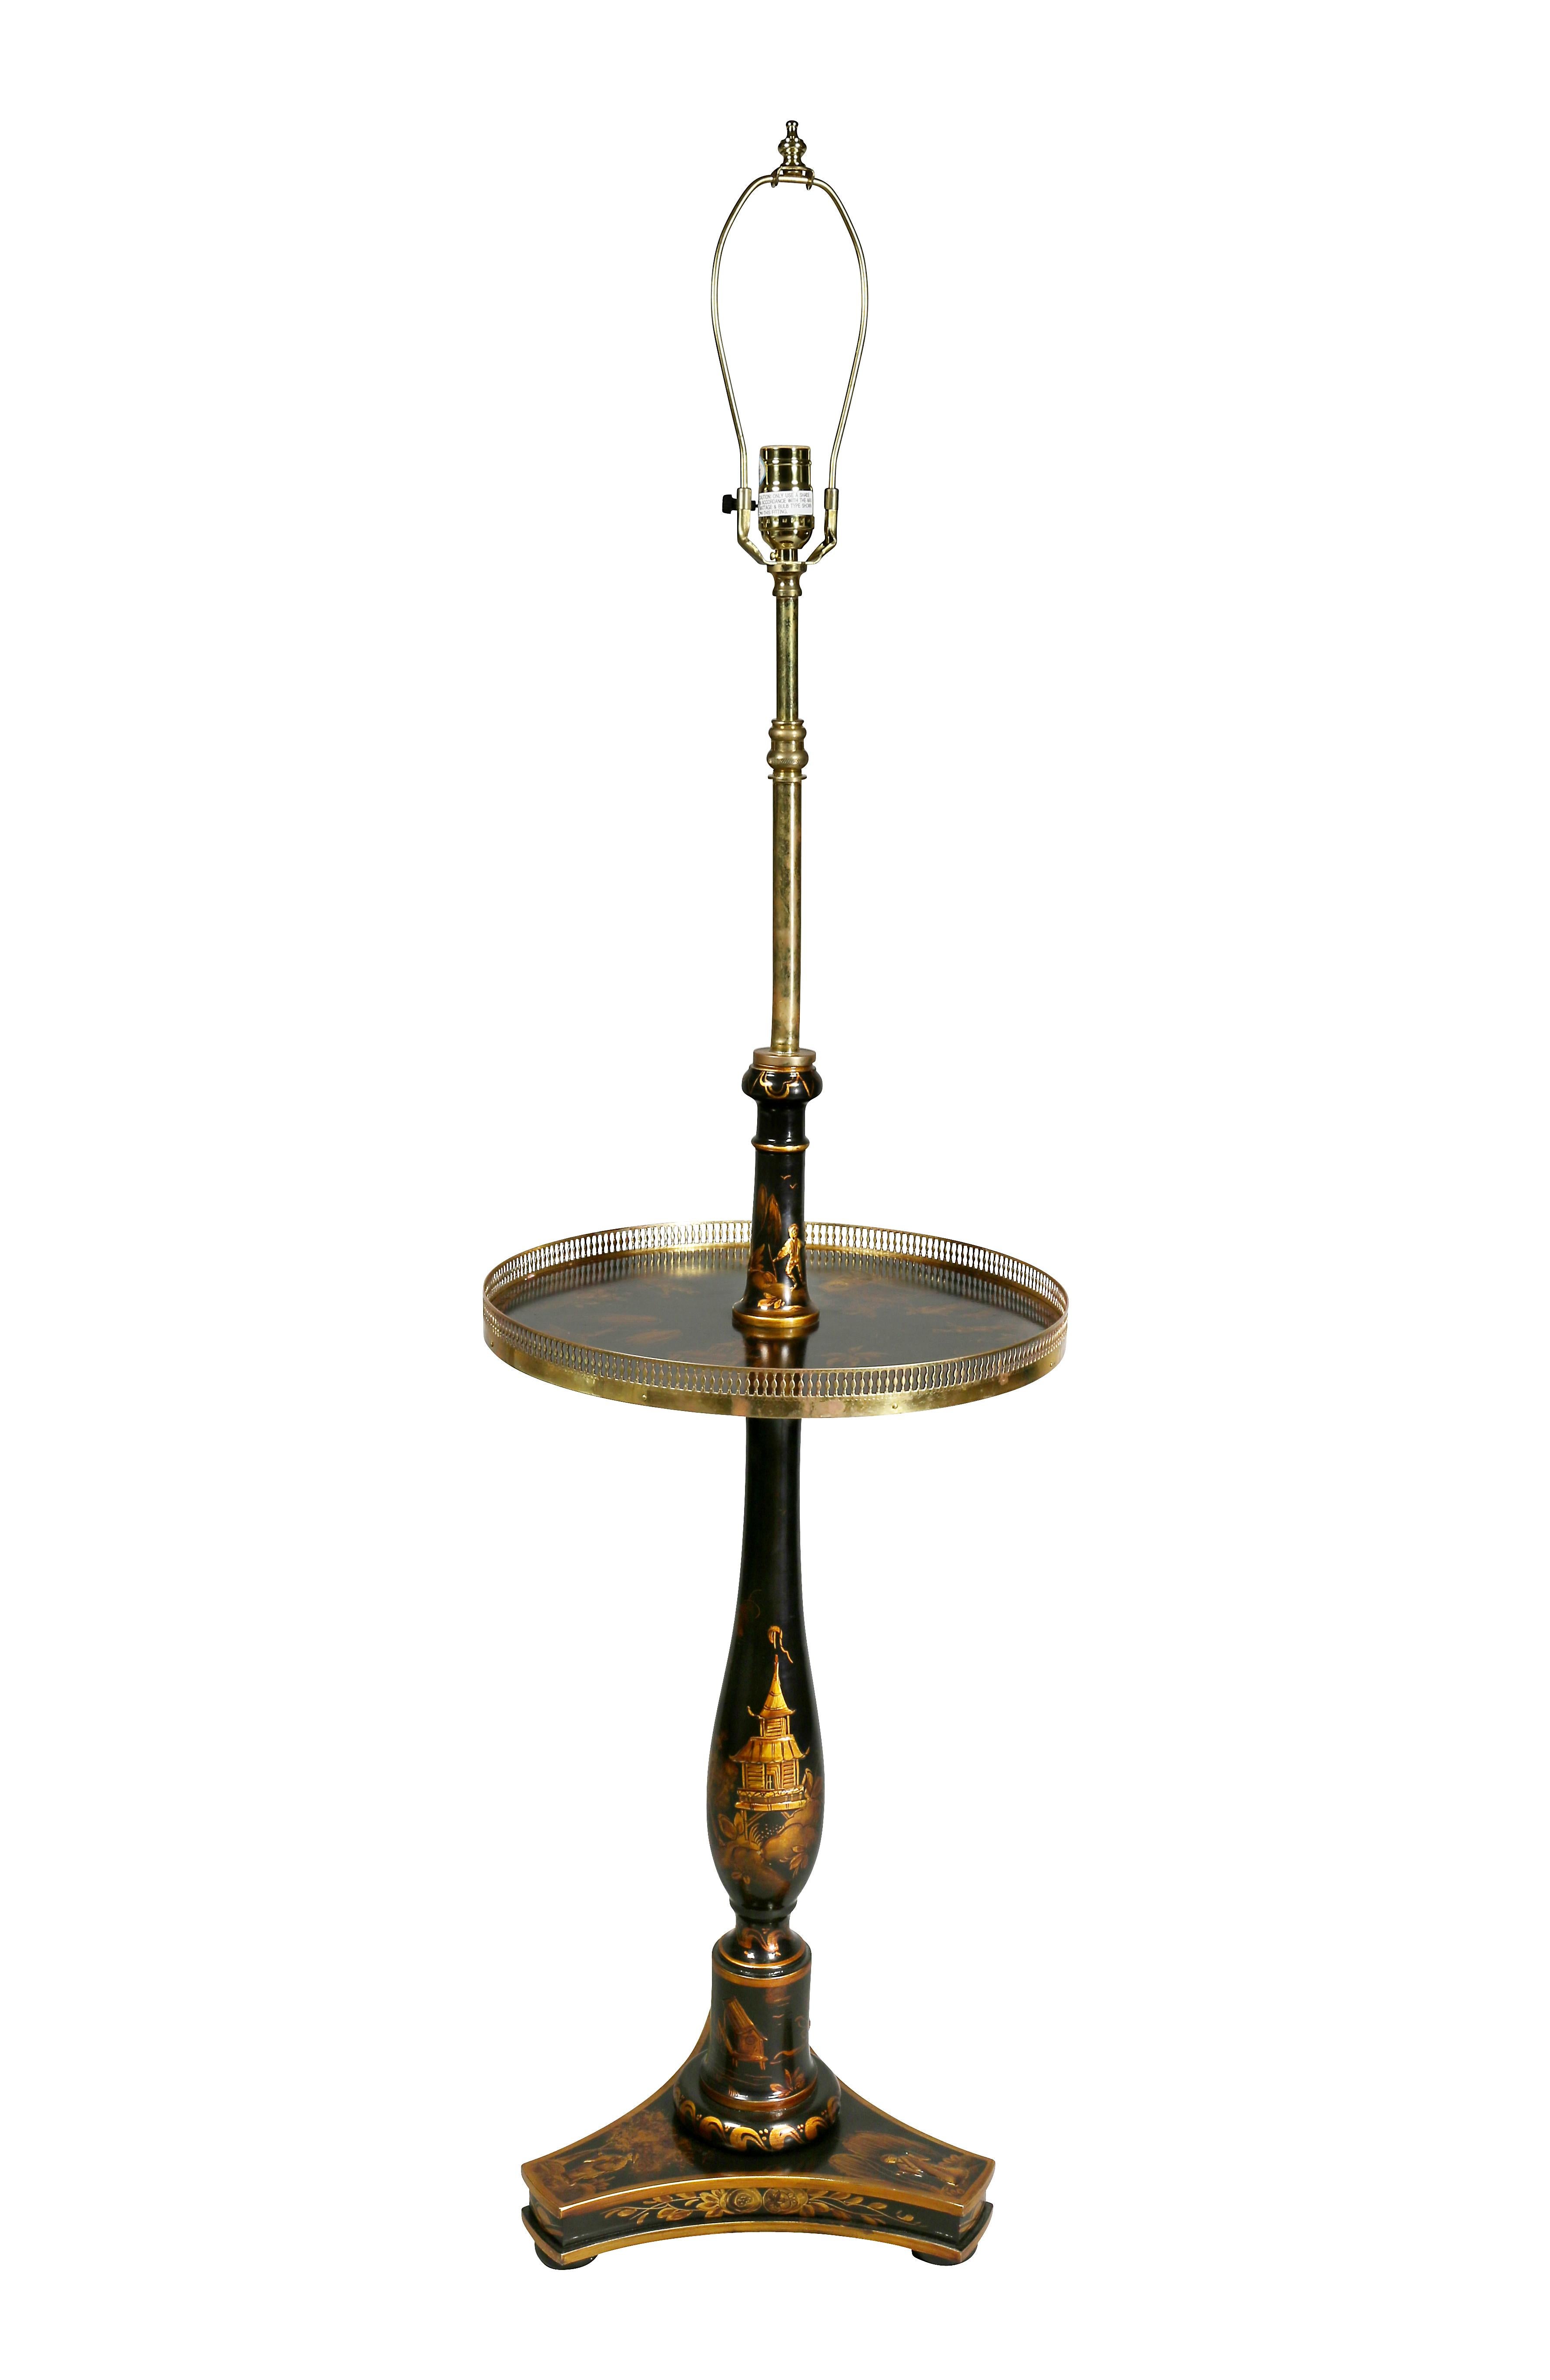 With brass fittings, one light and lower circular shelf with brass gallery raised on a tripartite base. Estate of Michael D. Dingman.